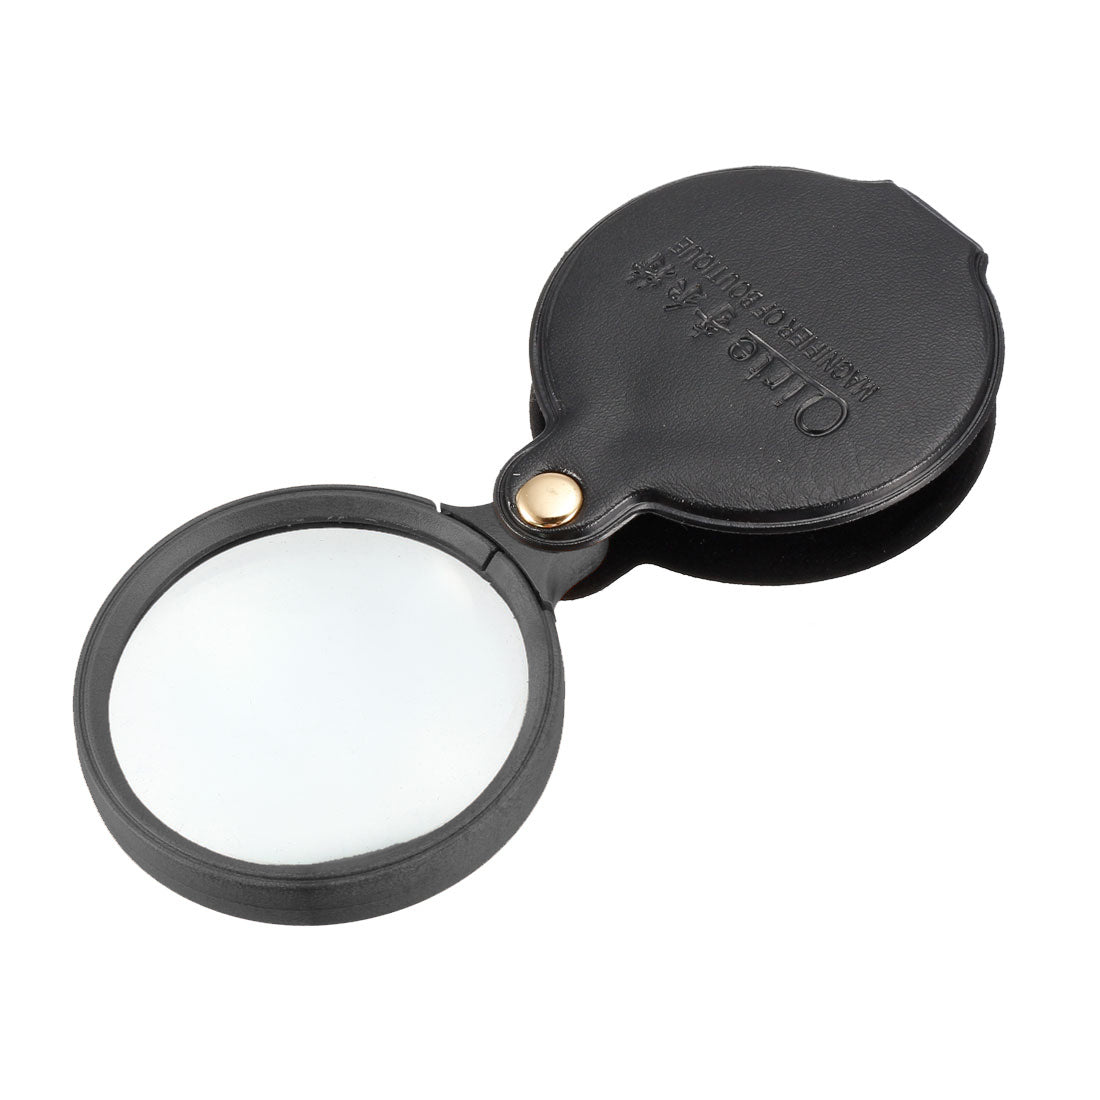 uxcell Uxcell 60mm 10X Pocket Folding Magnifier Loupe Magnifying Glass with Leather Case (Black)